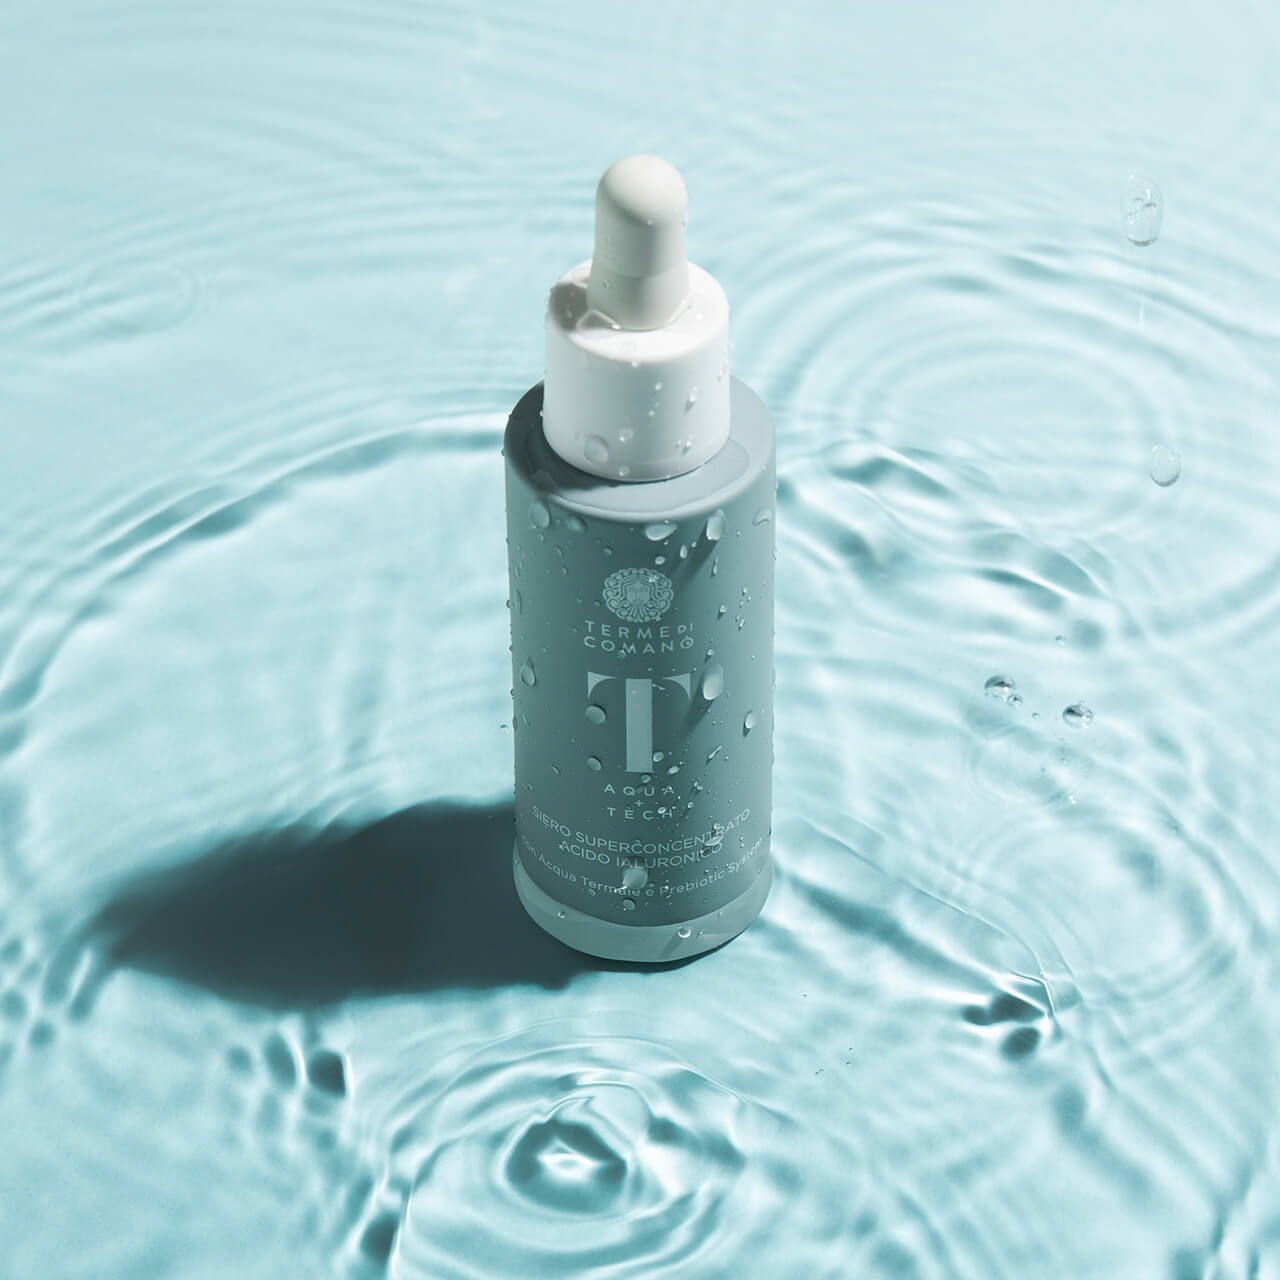 Superconcentrated Hyaluronic Acid Serum